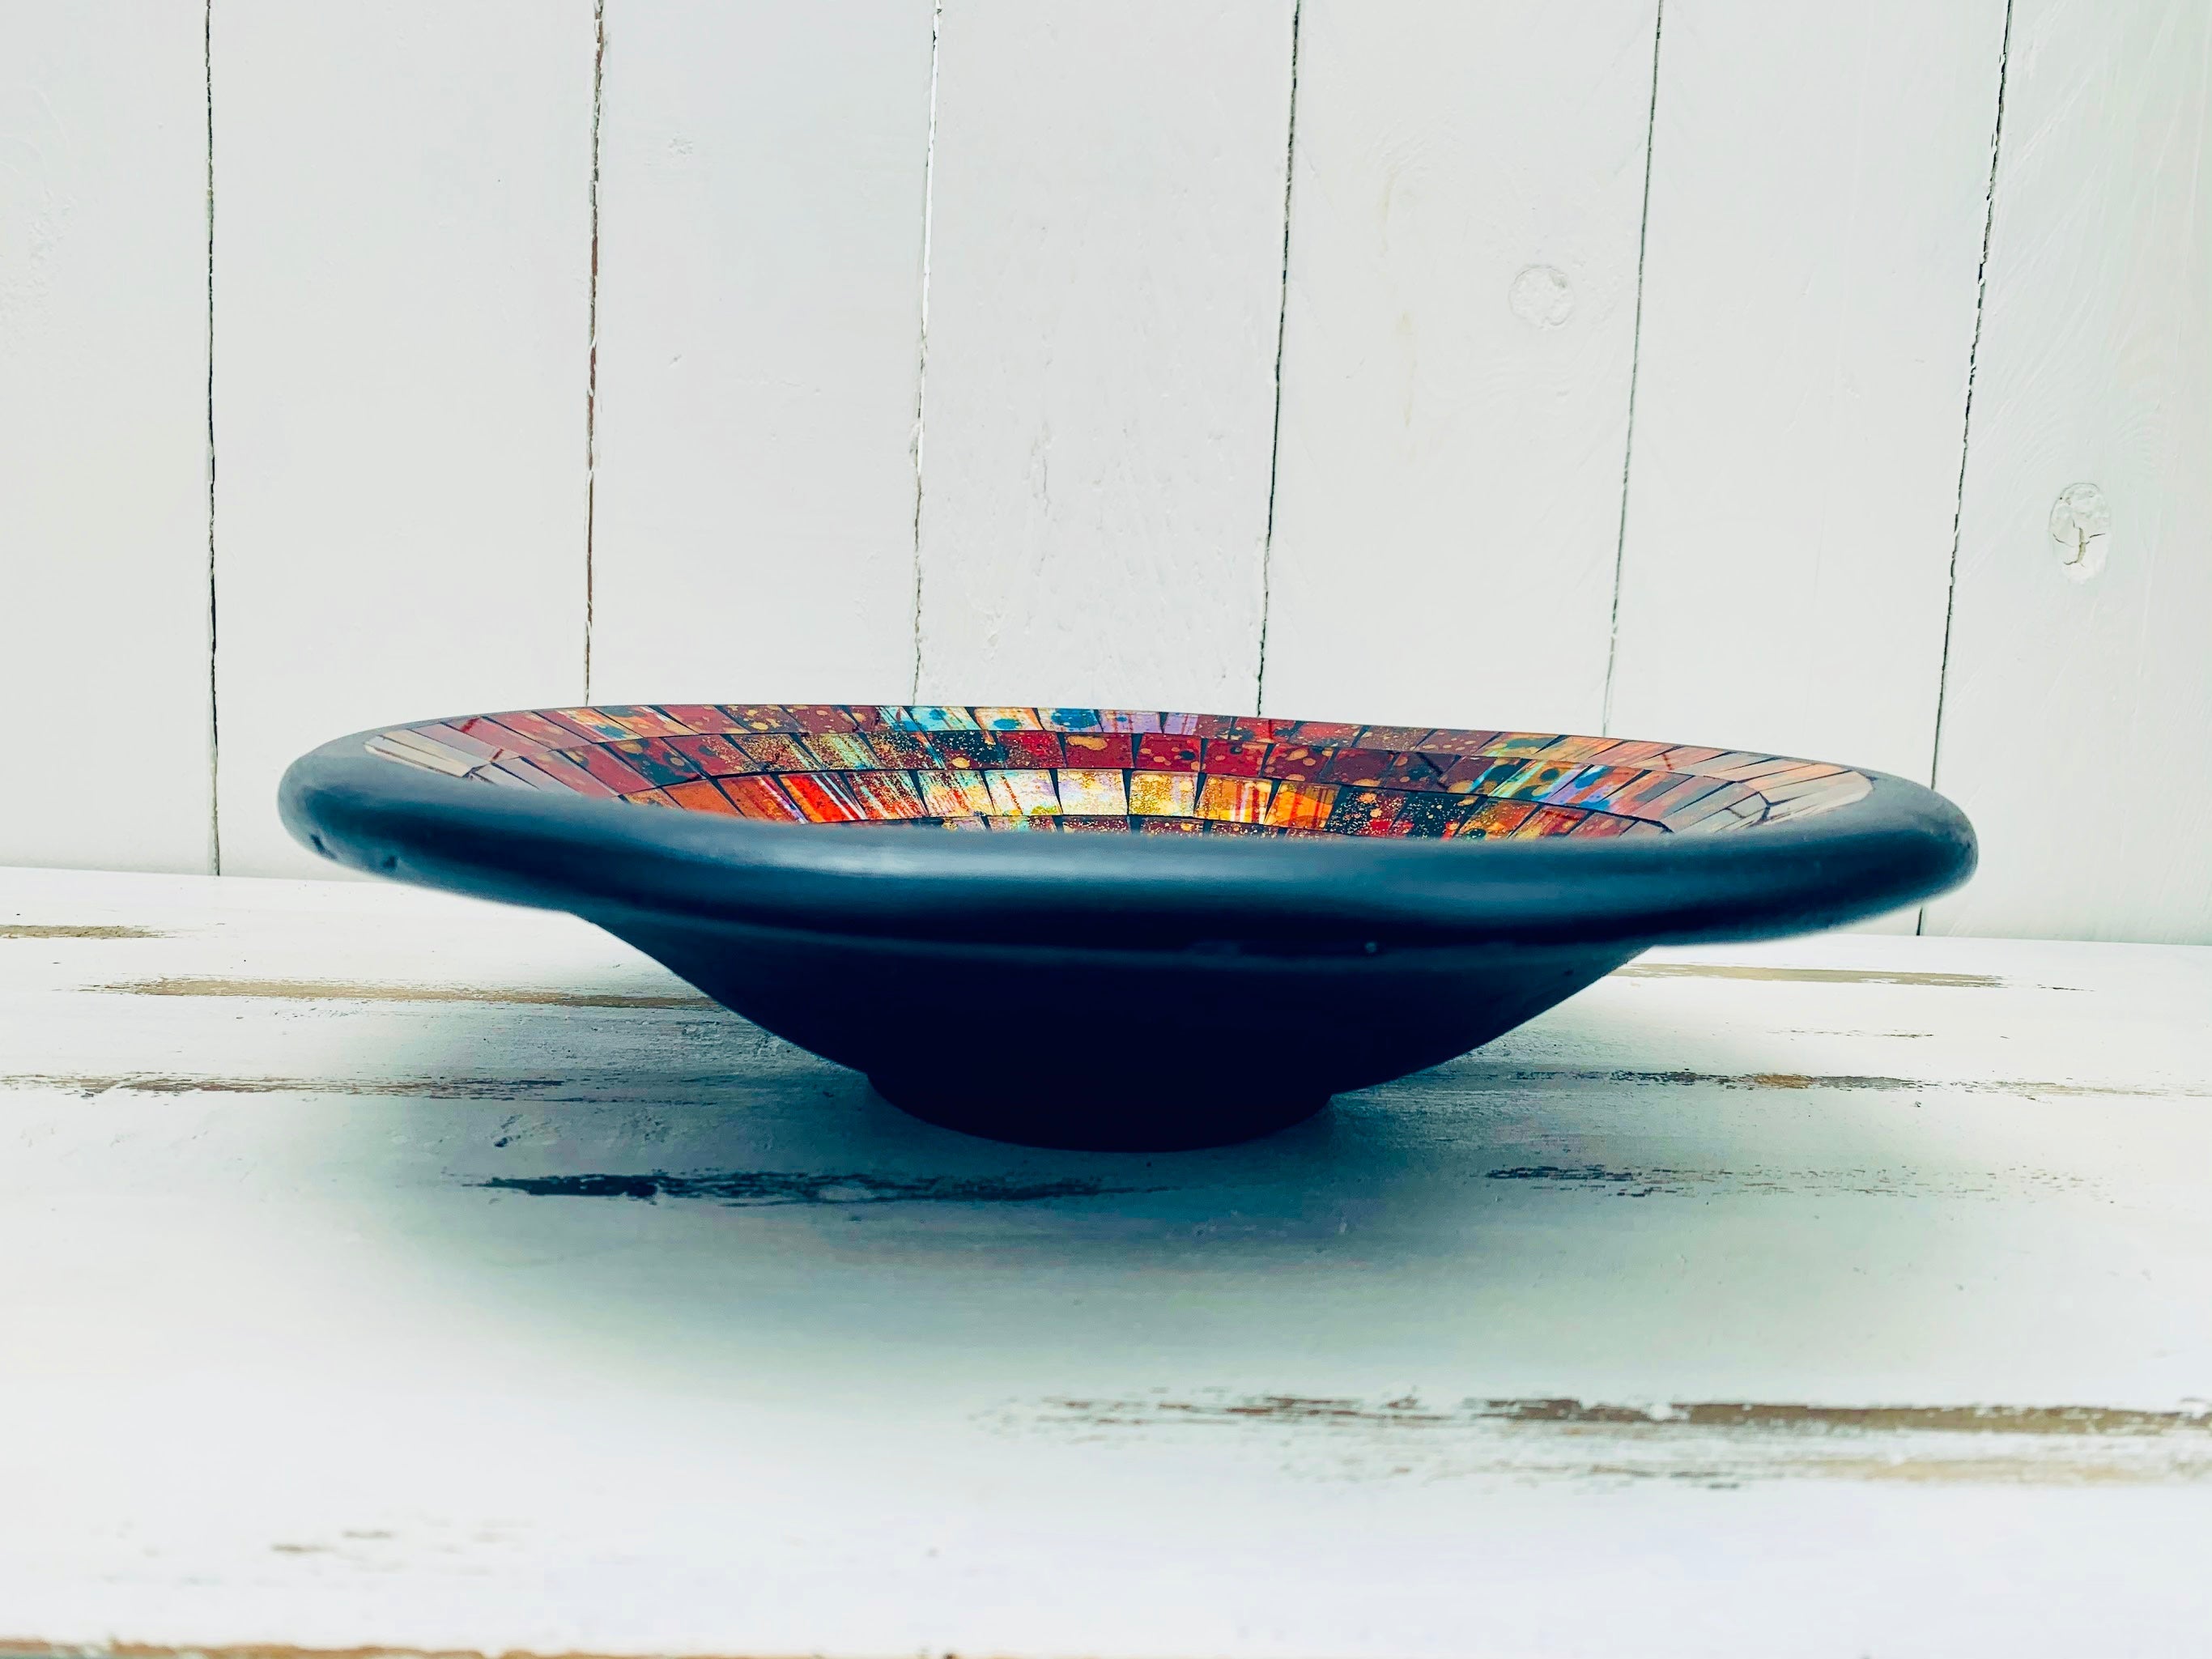 side view of mosaic bowl